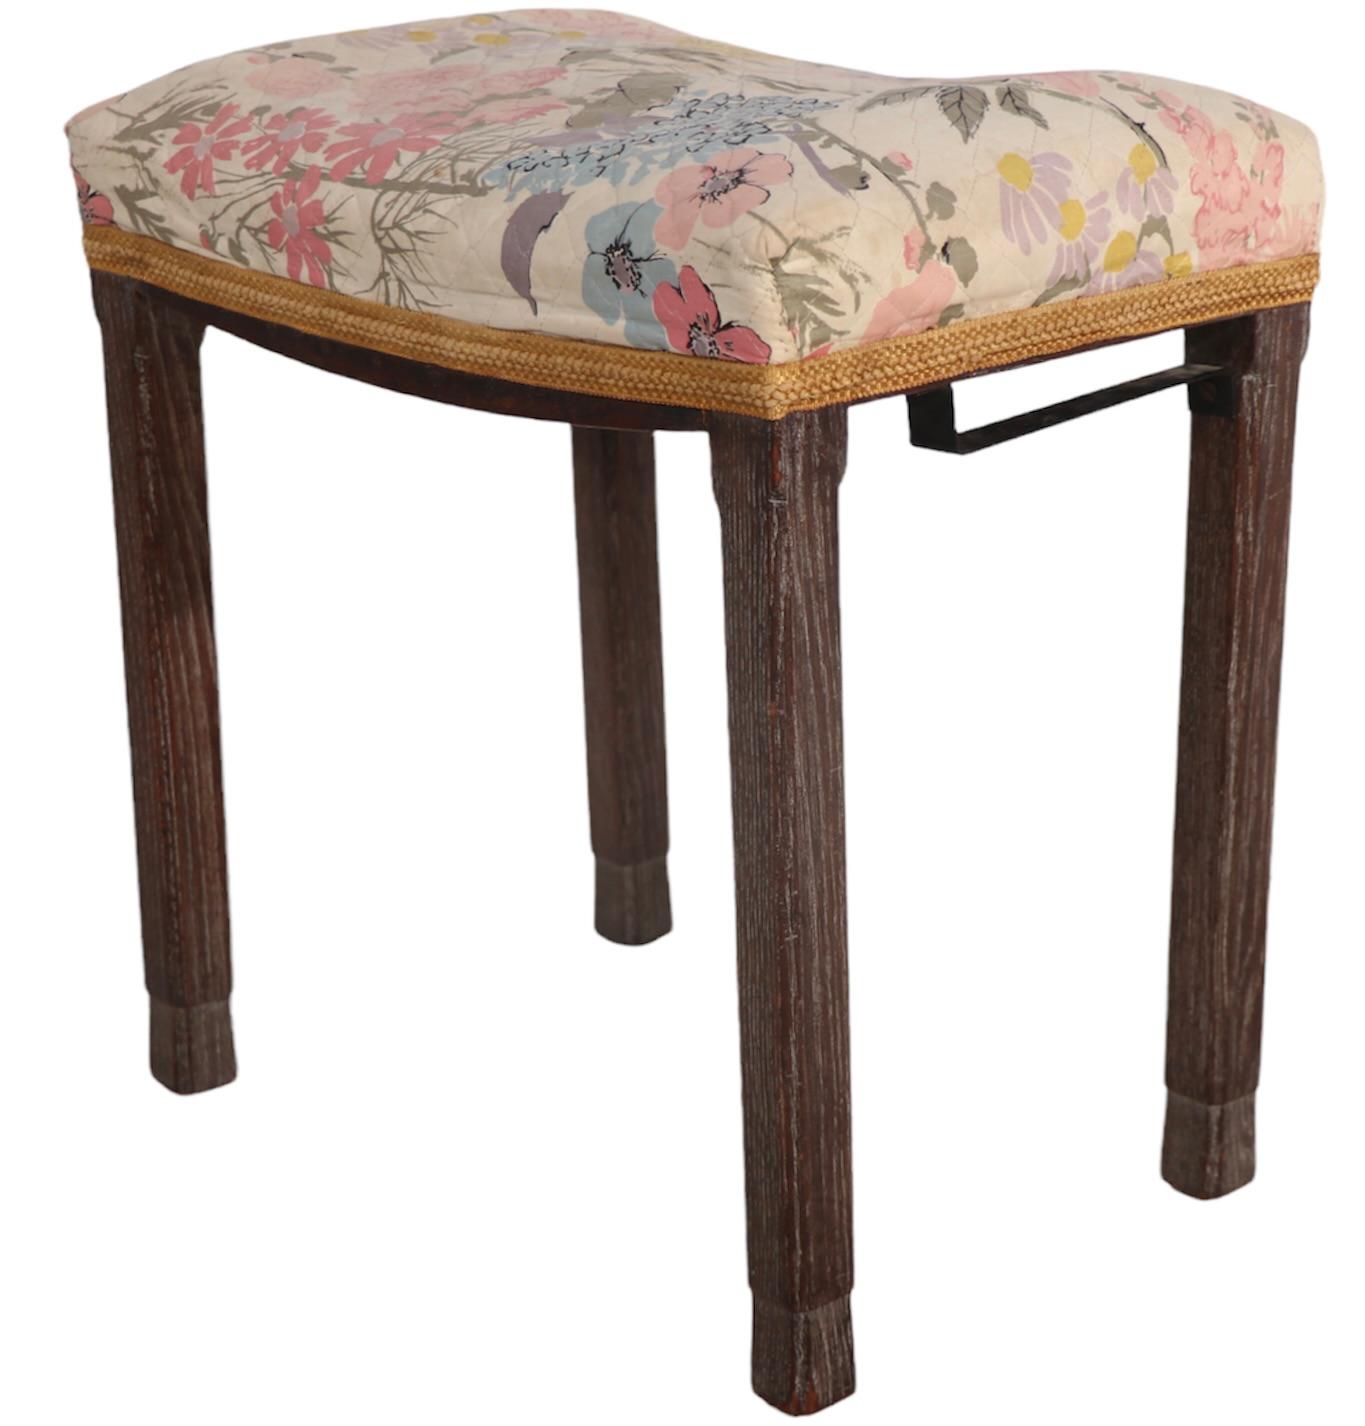 English King George VI Coronation Stool in Cerused Oak Ca 1937 Made in England For Sale